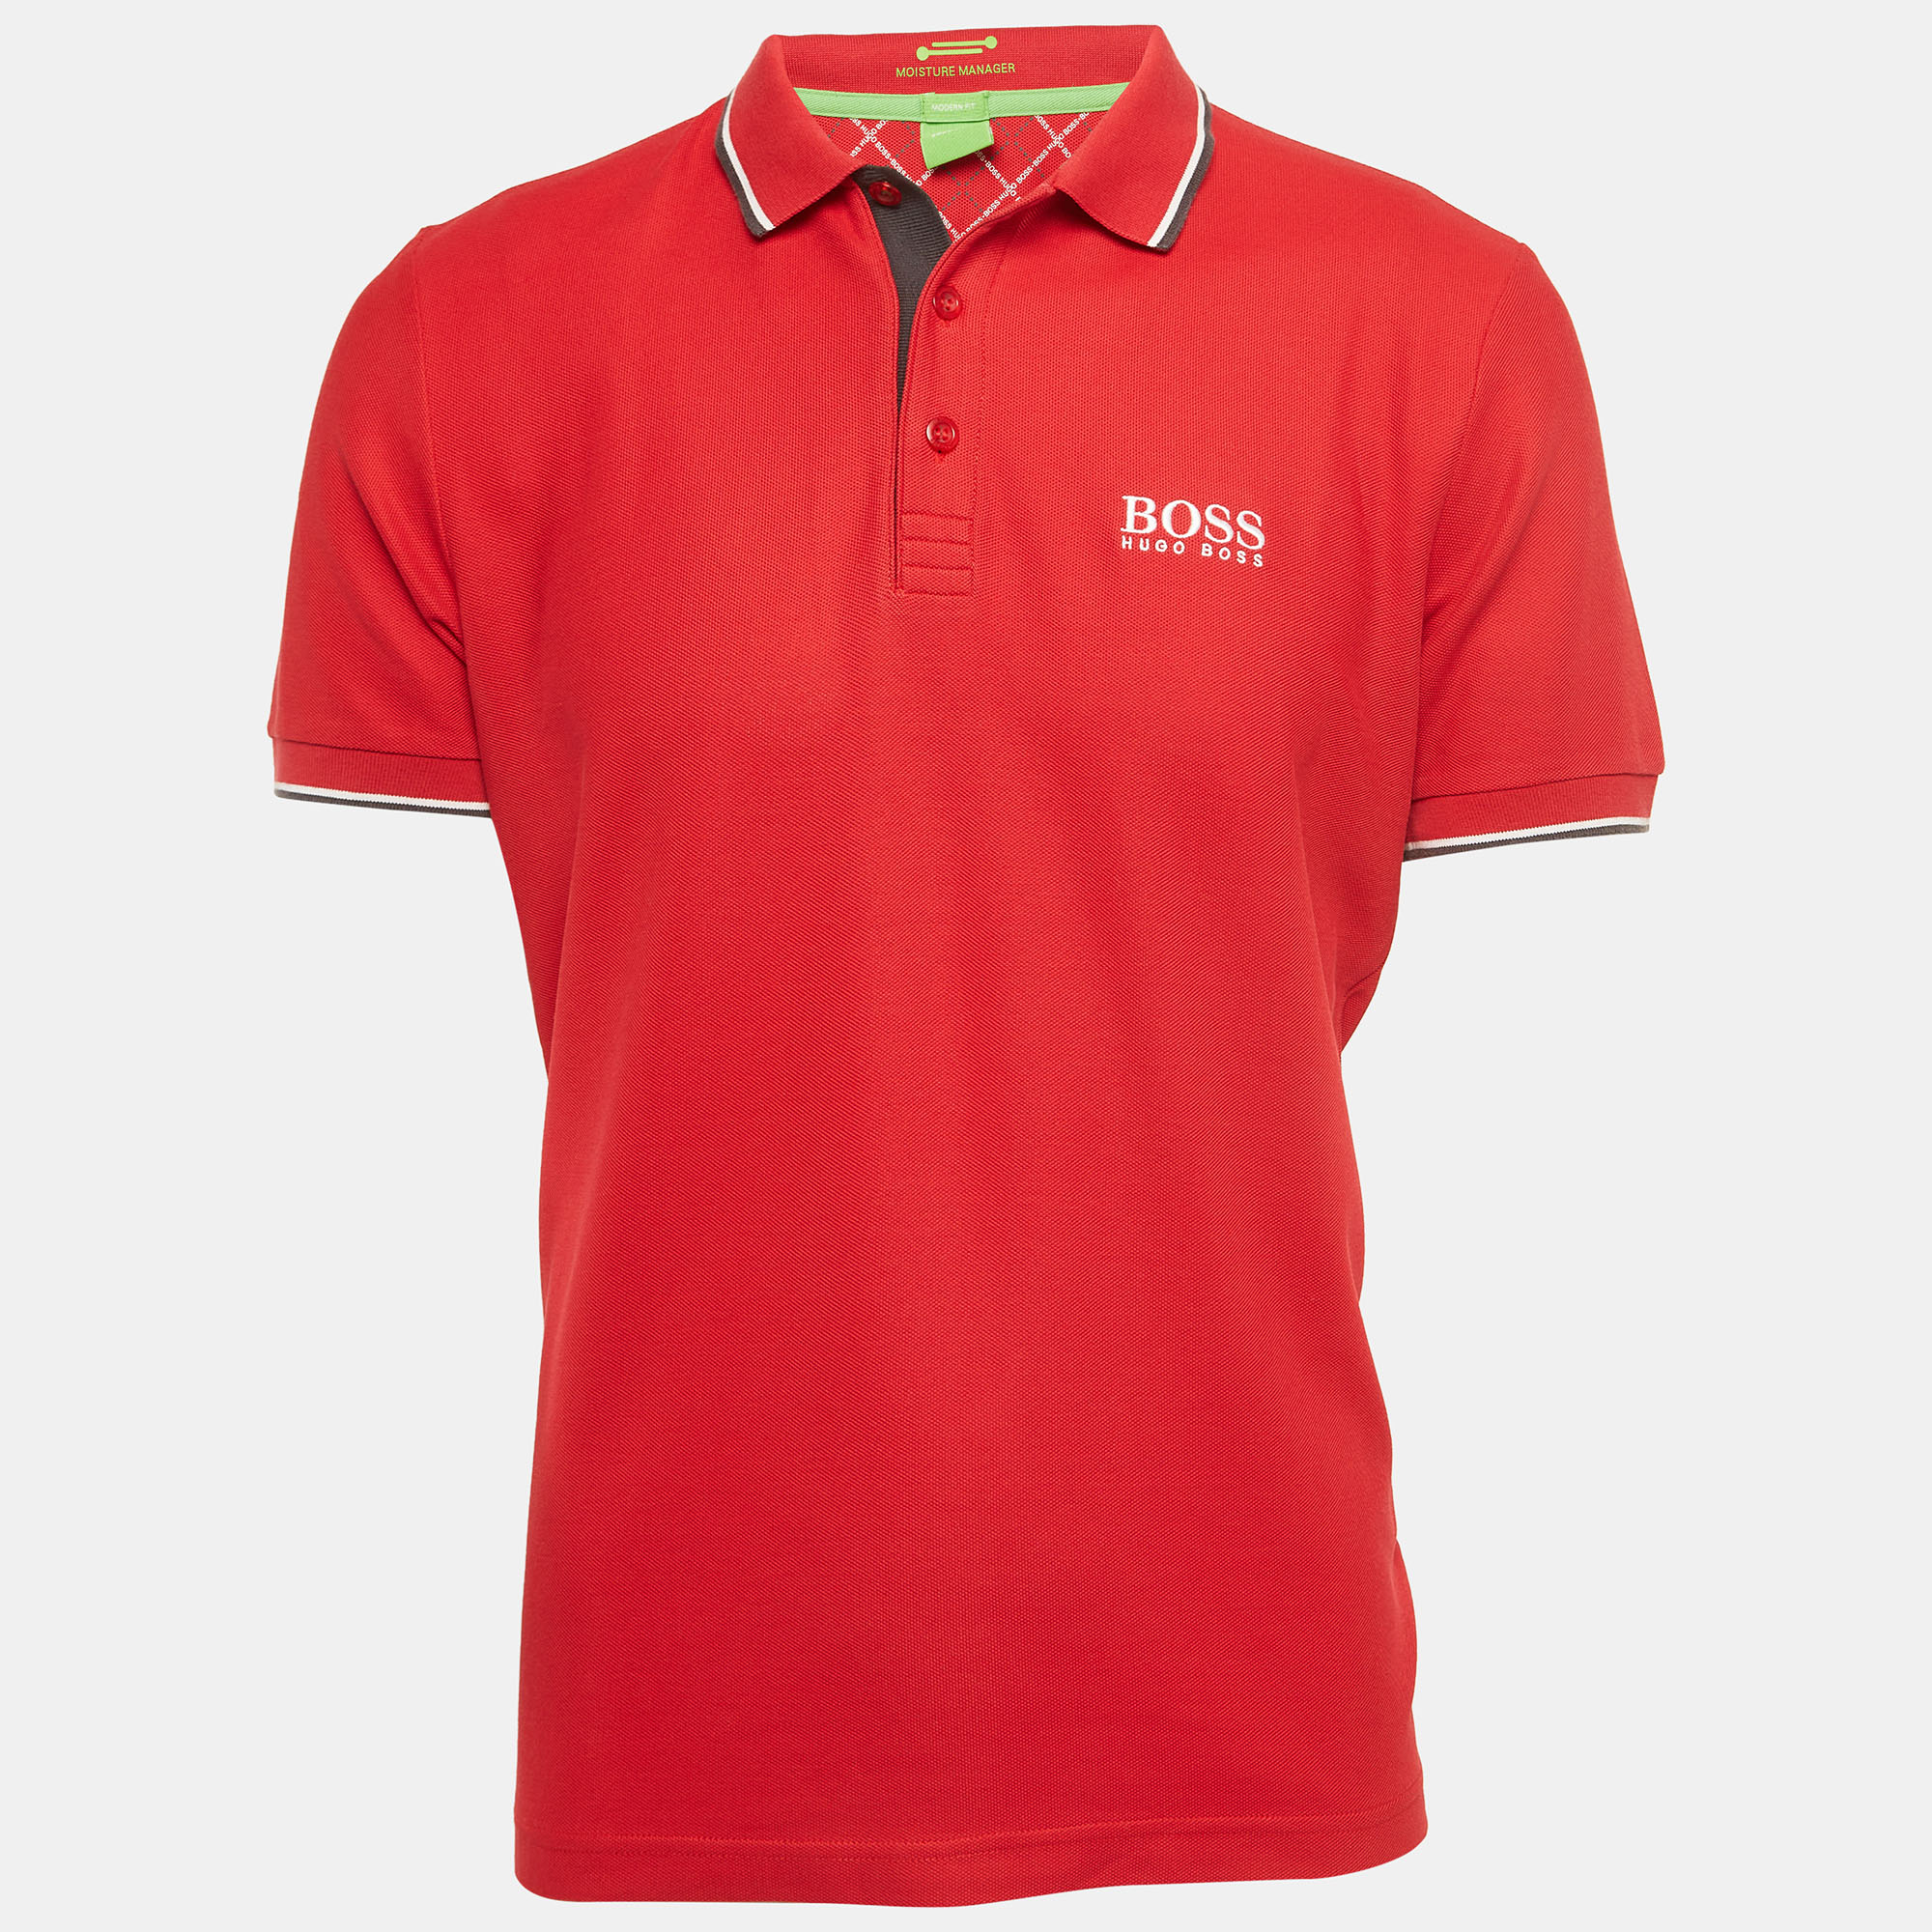 Boss by hugo boss red logo embroidered knit polo t-shirt l